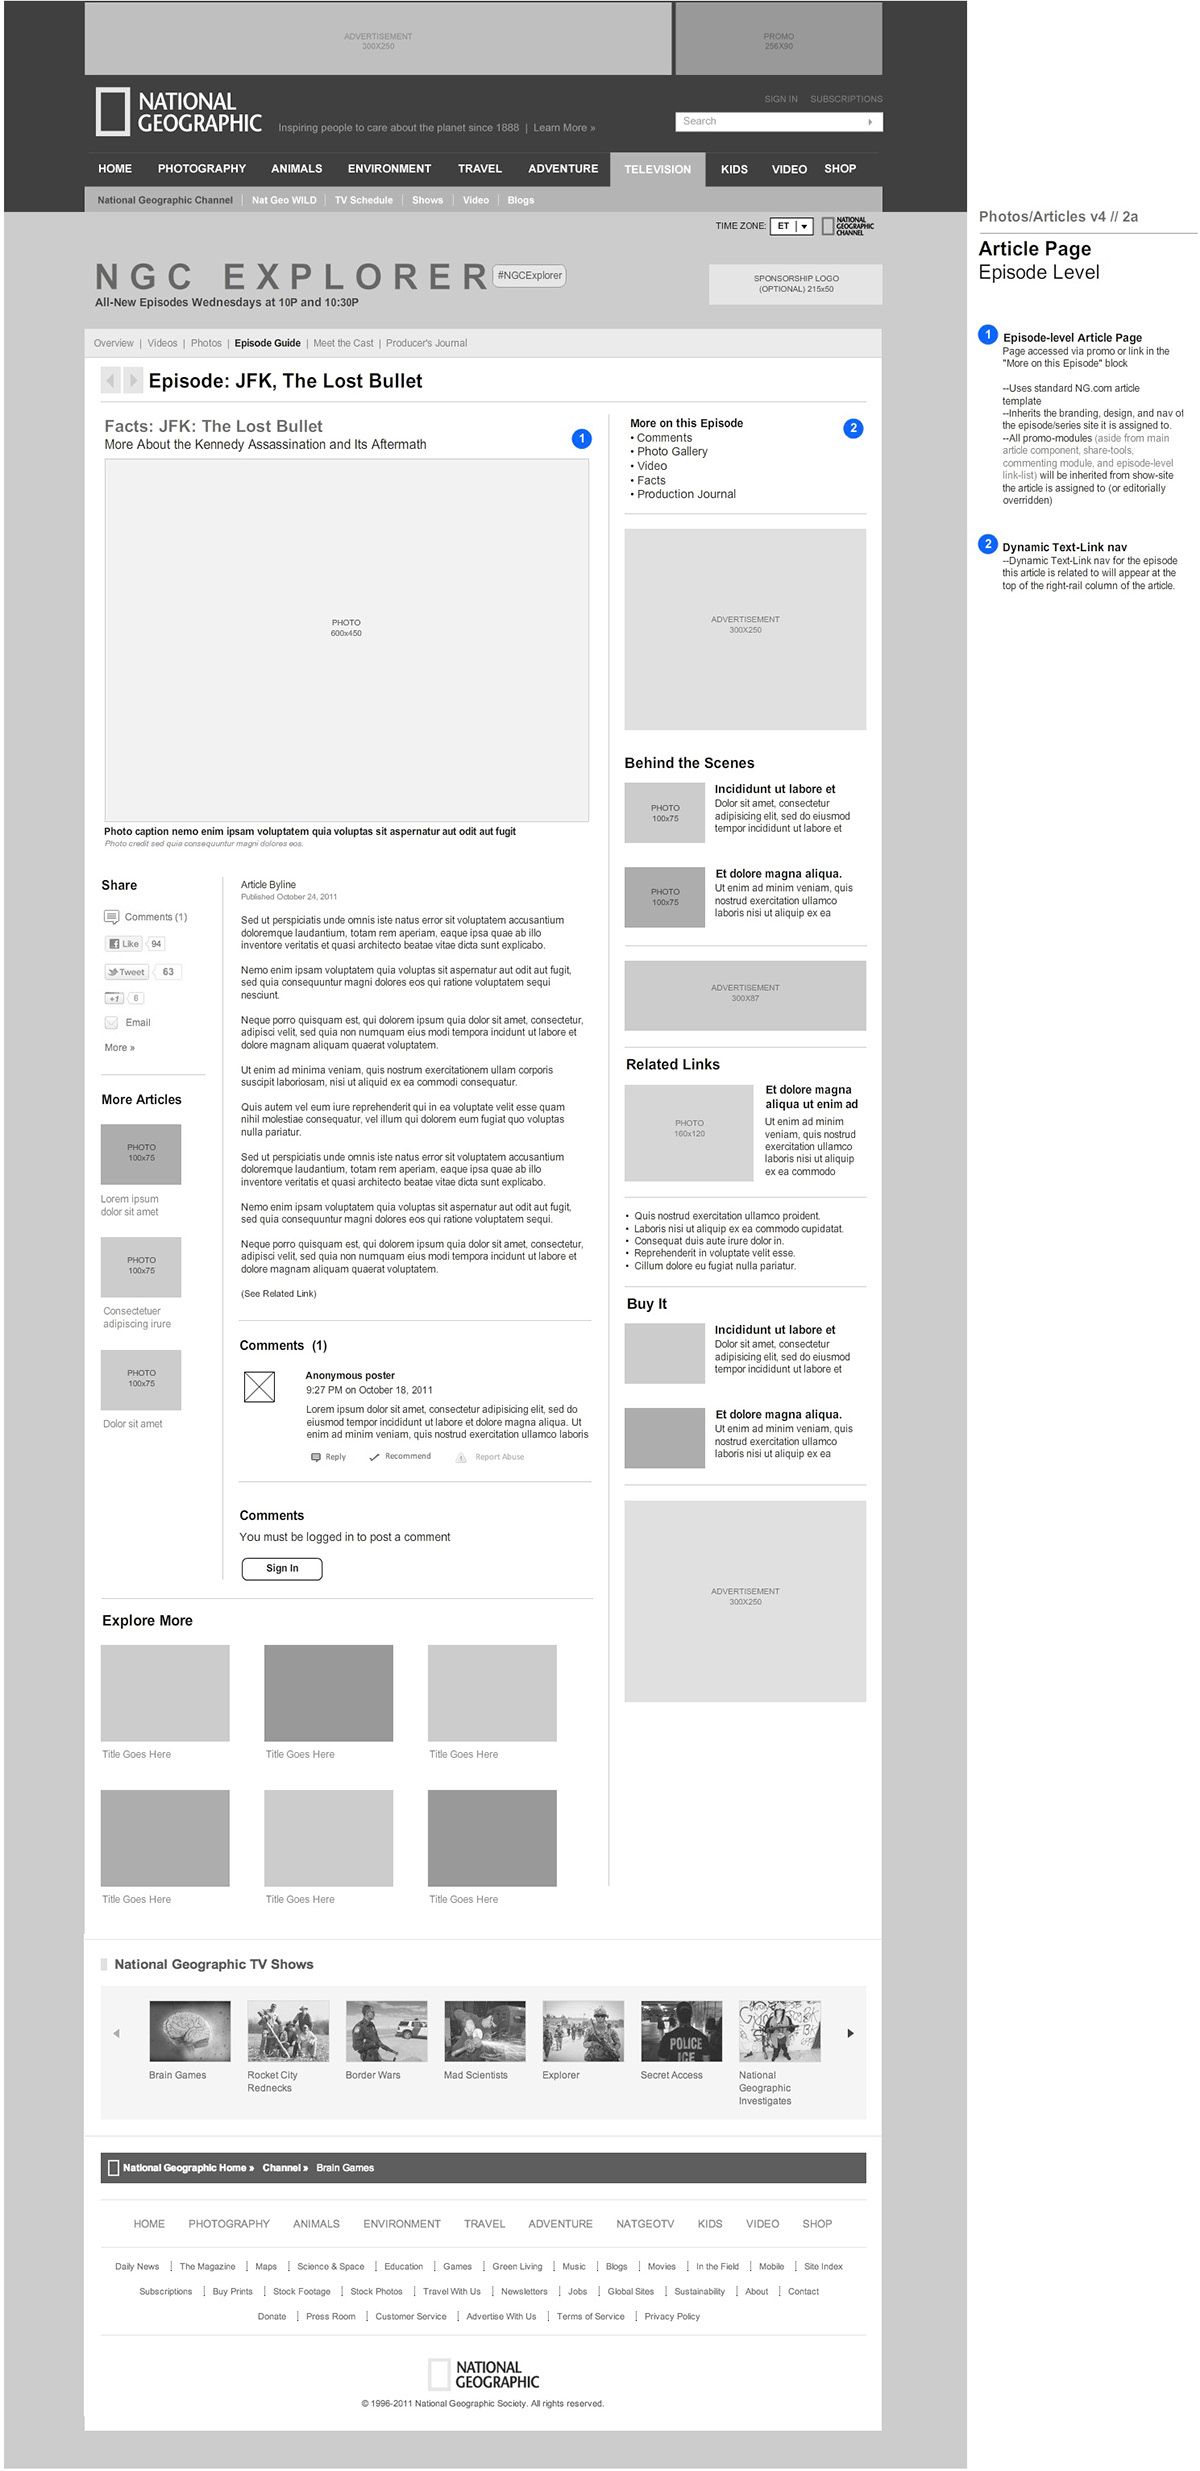 National geographic channel redesign wireframes